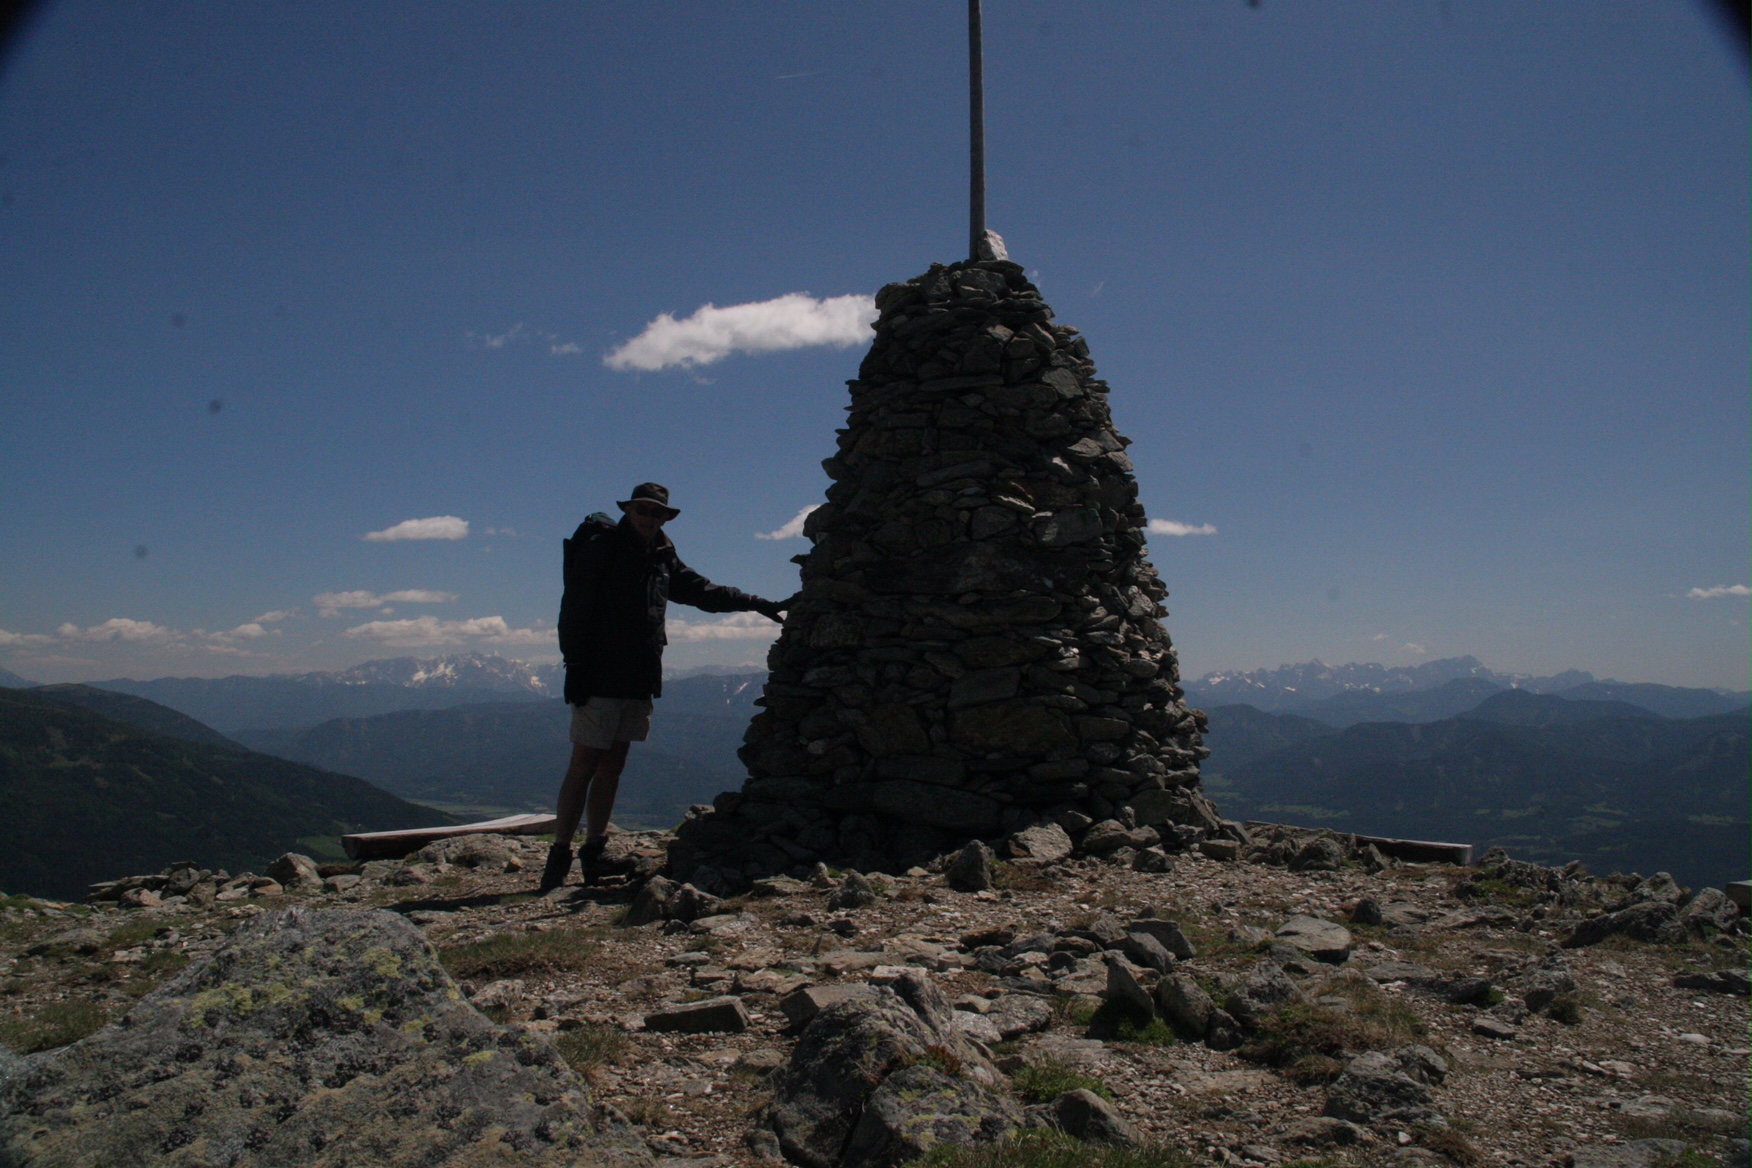 Austria: The summit, about 3,000 feet. Looking towards the mountains of Slovenia. Not mountaineering, but waymarked trails. Safe, but long uphill trudge. Too old now!